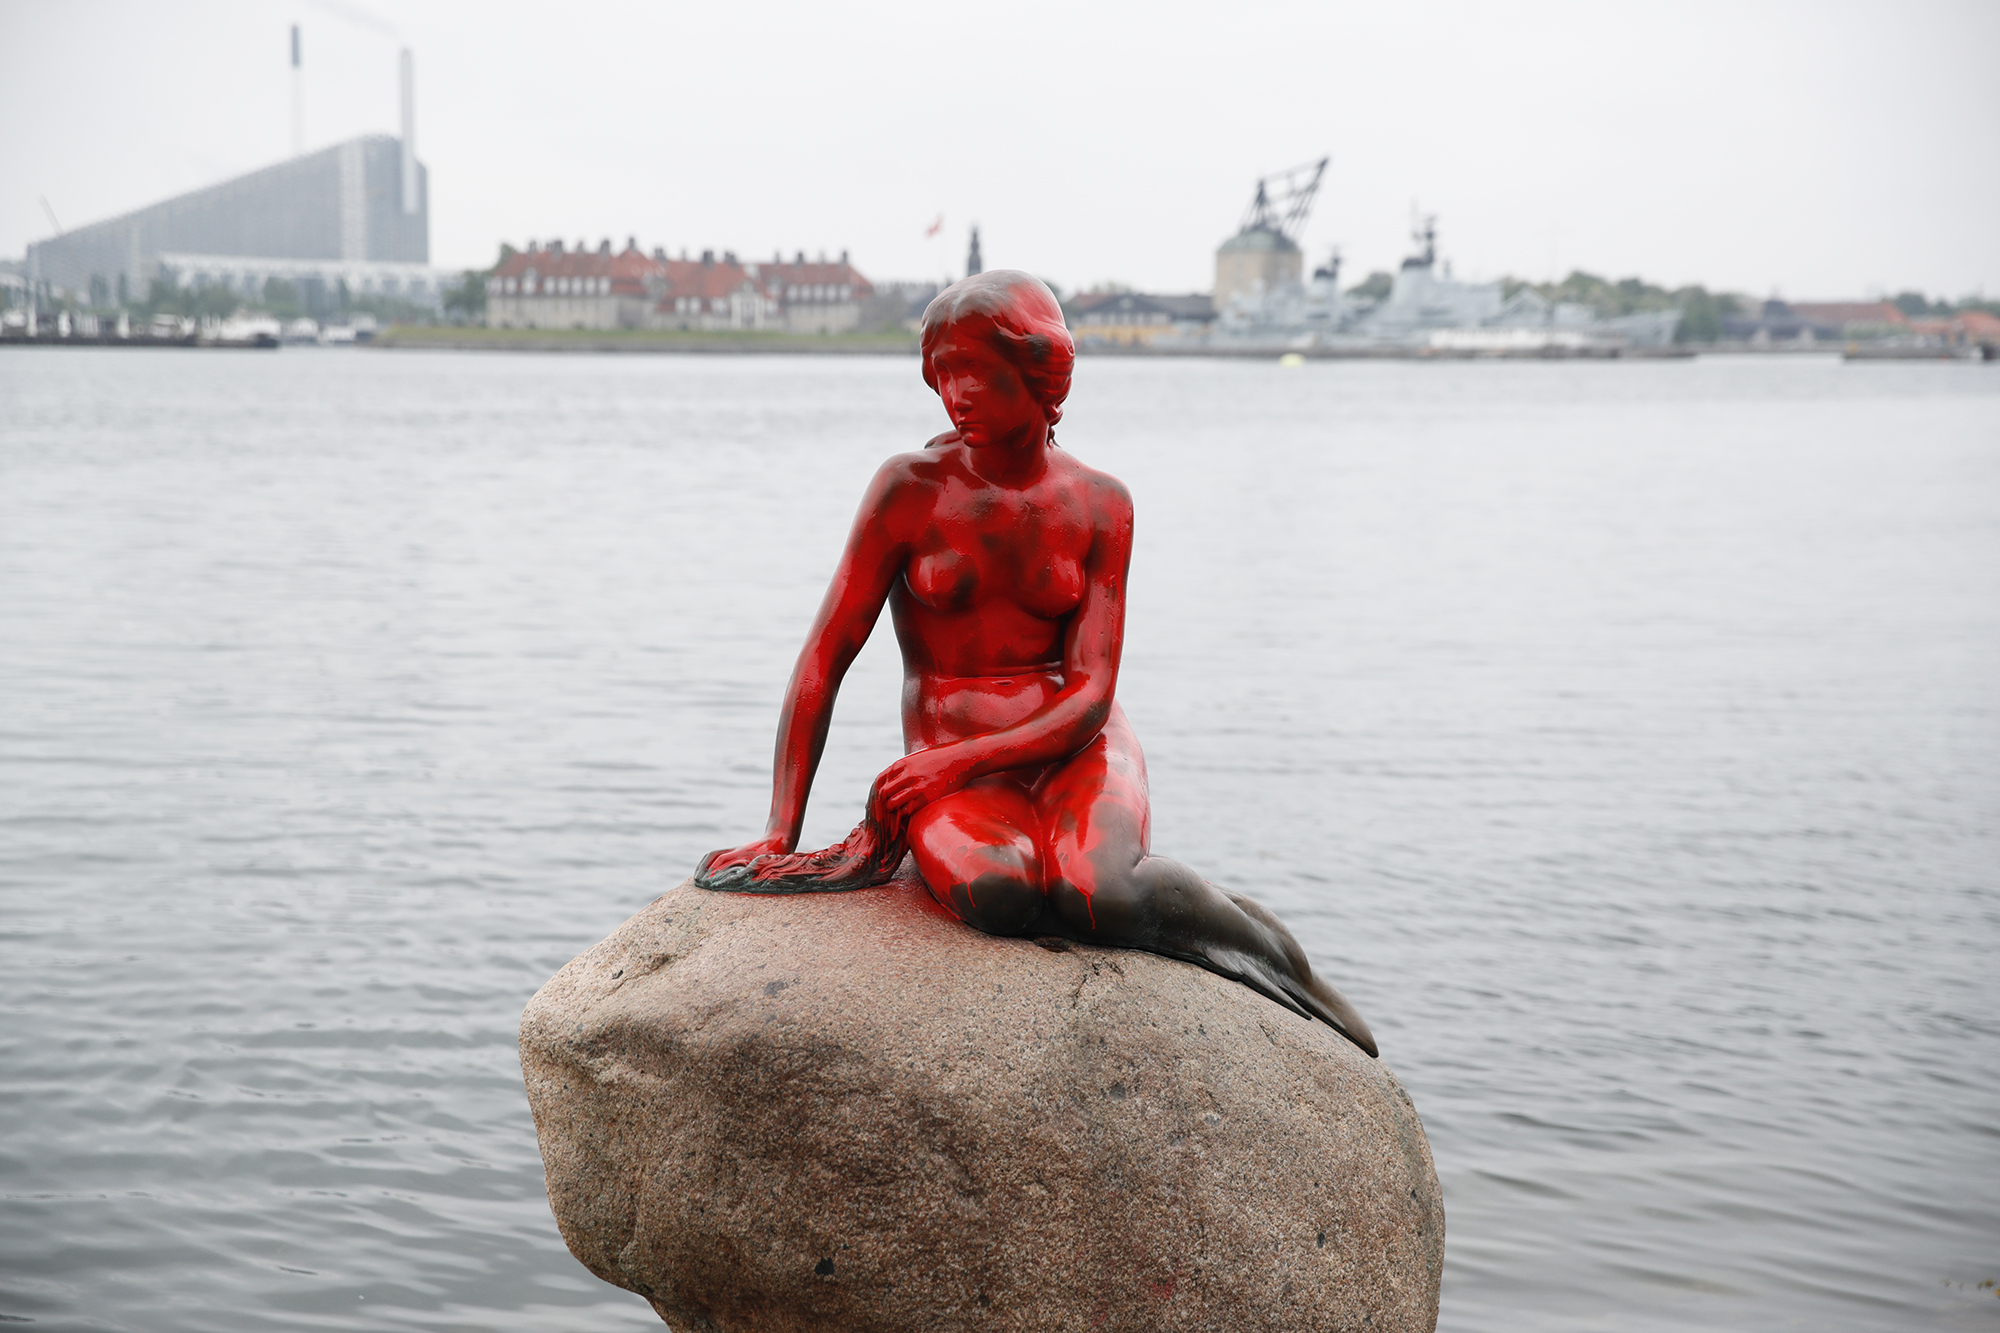 Little Mermaid Statue in Copenhagen Drenched in Red Paint | Time